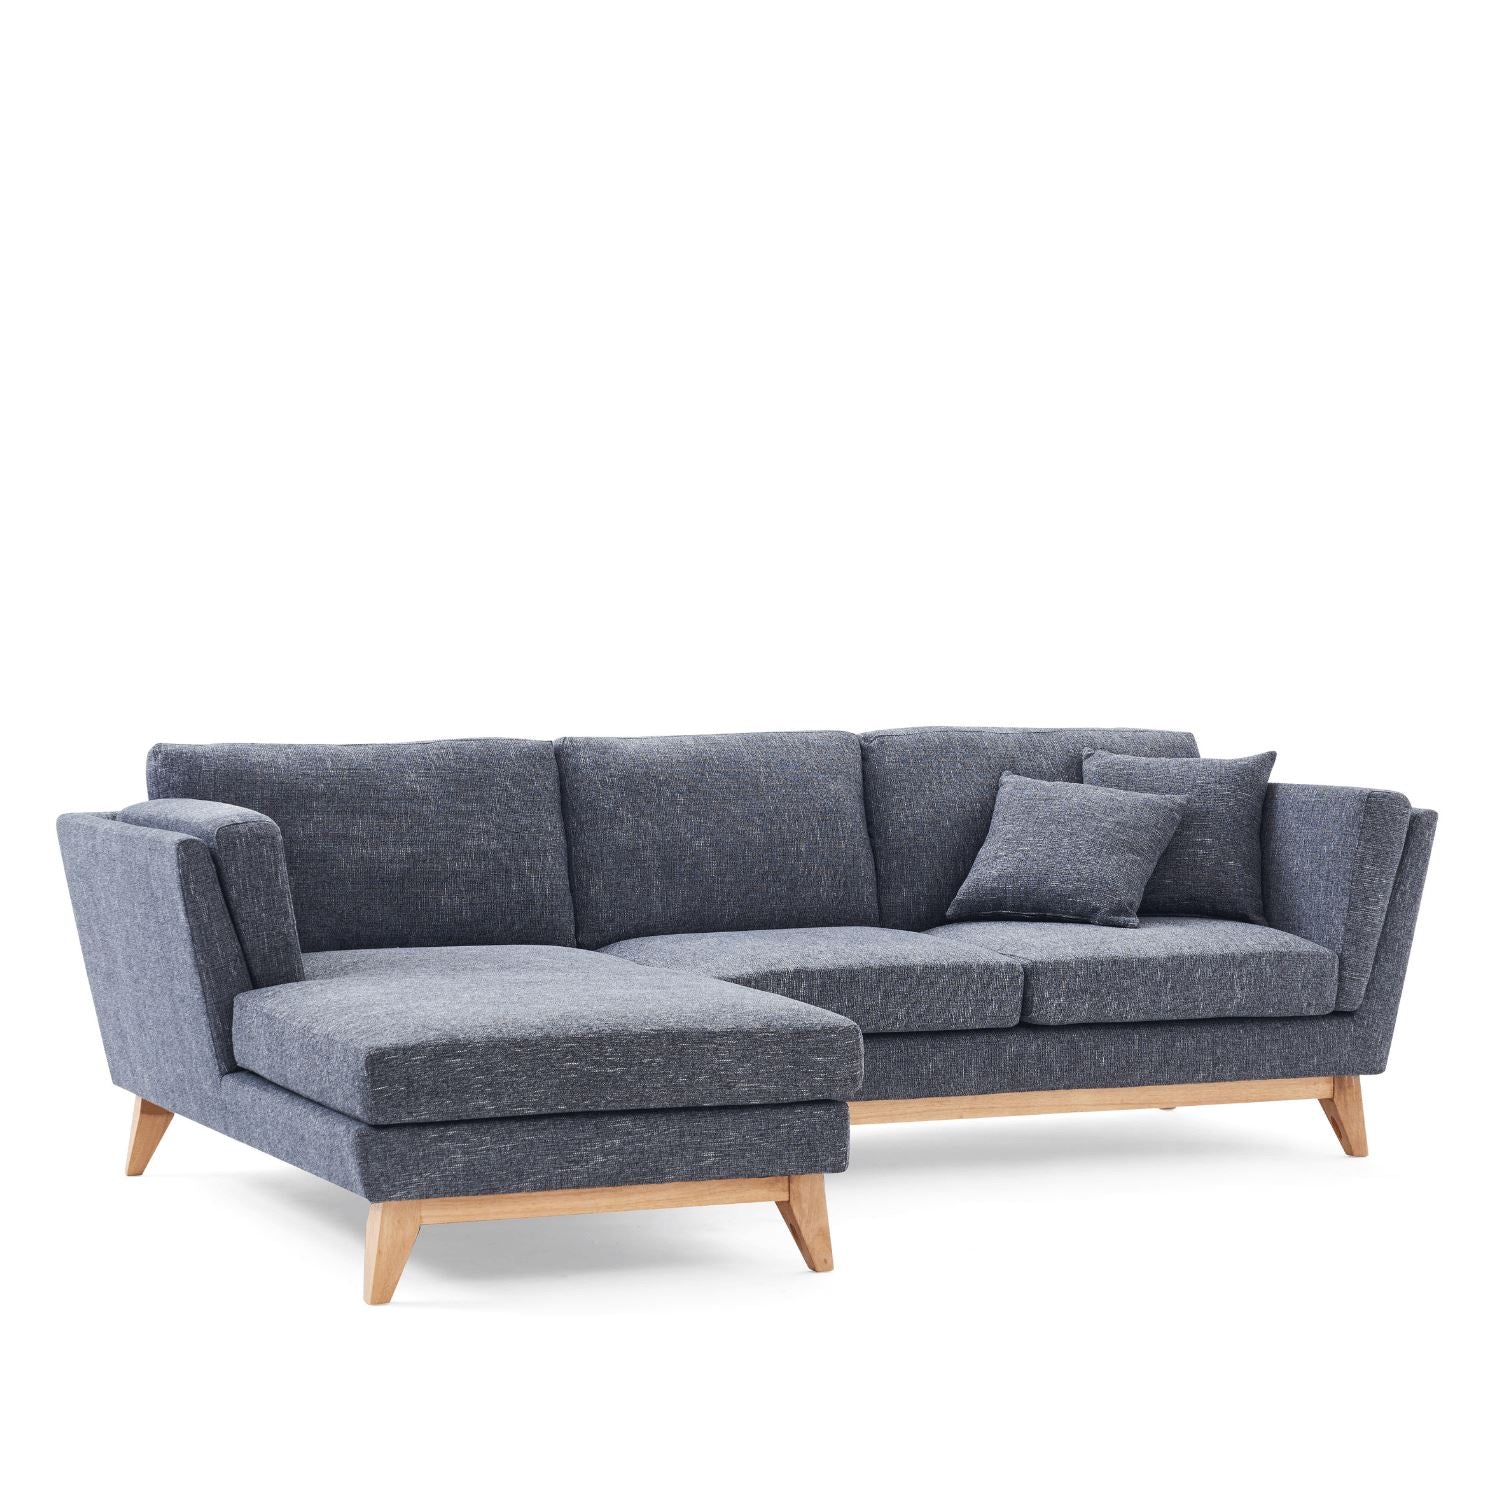 ValMinimal Sectional | Valyou Furniture